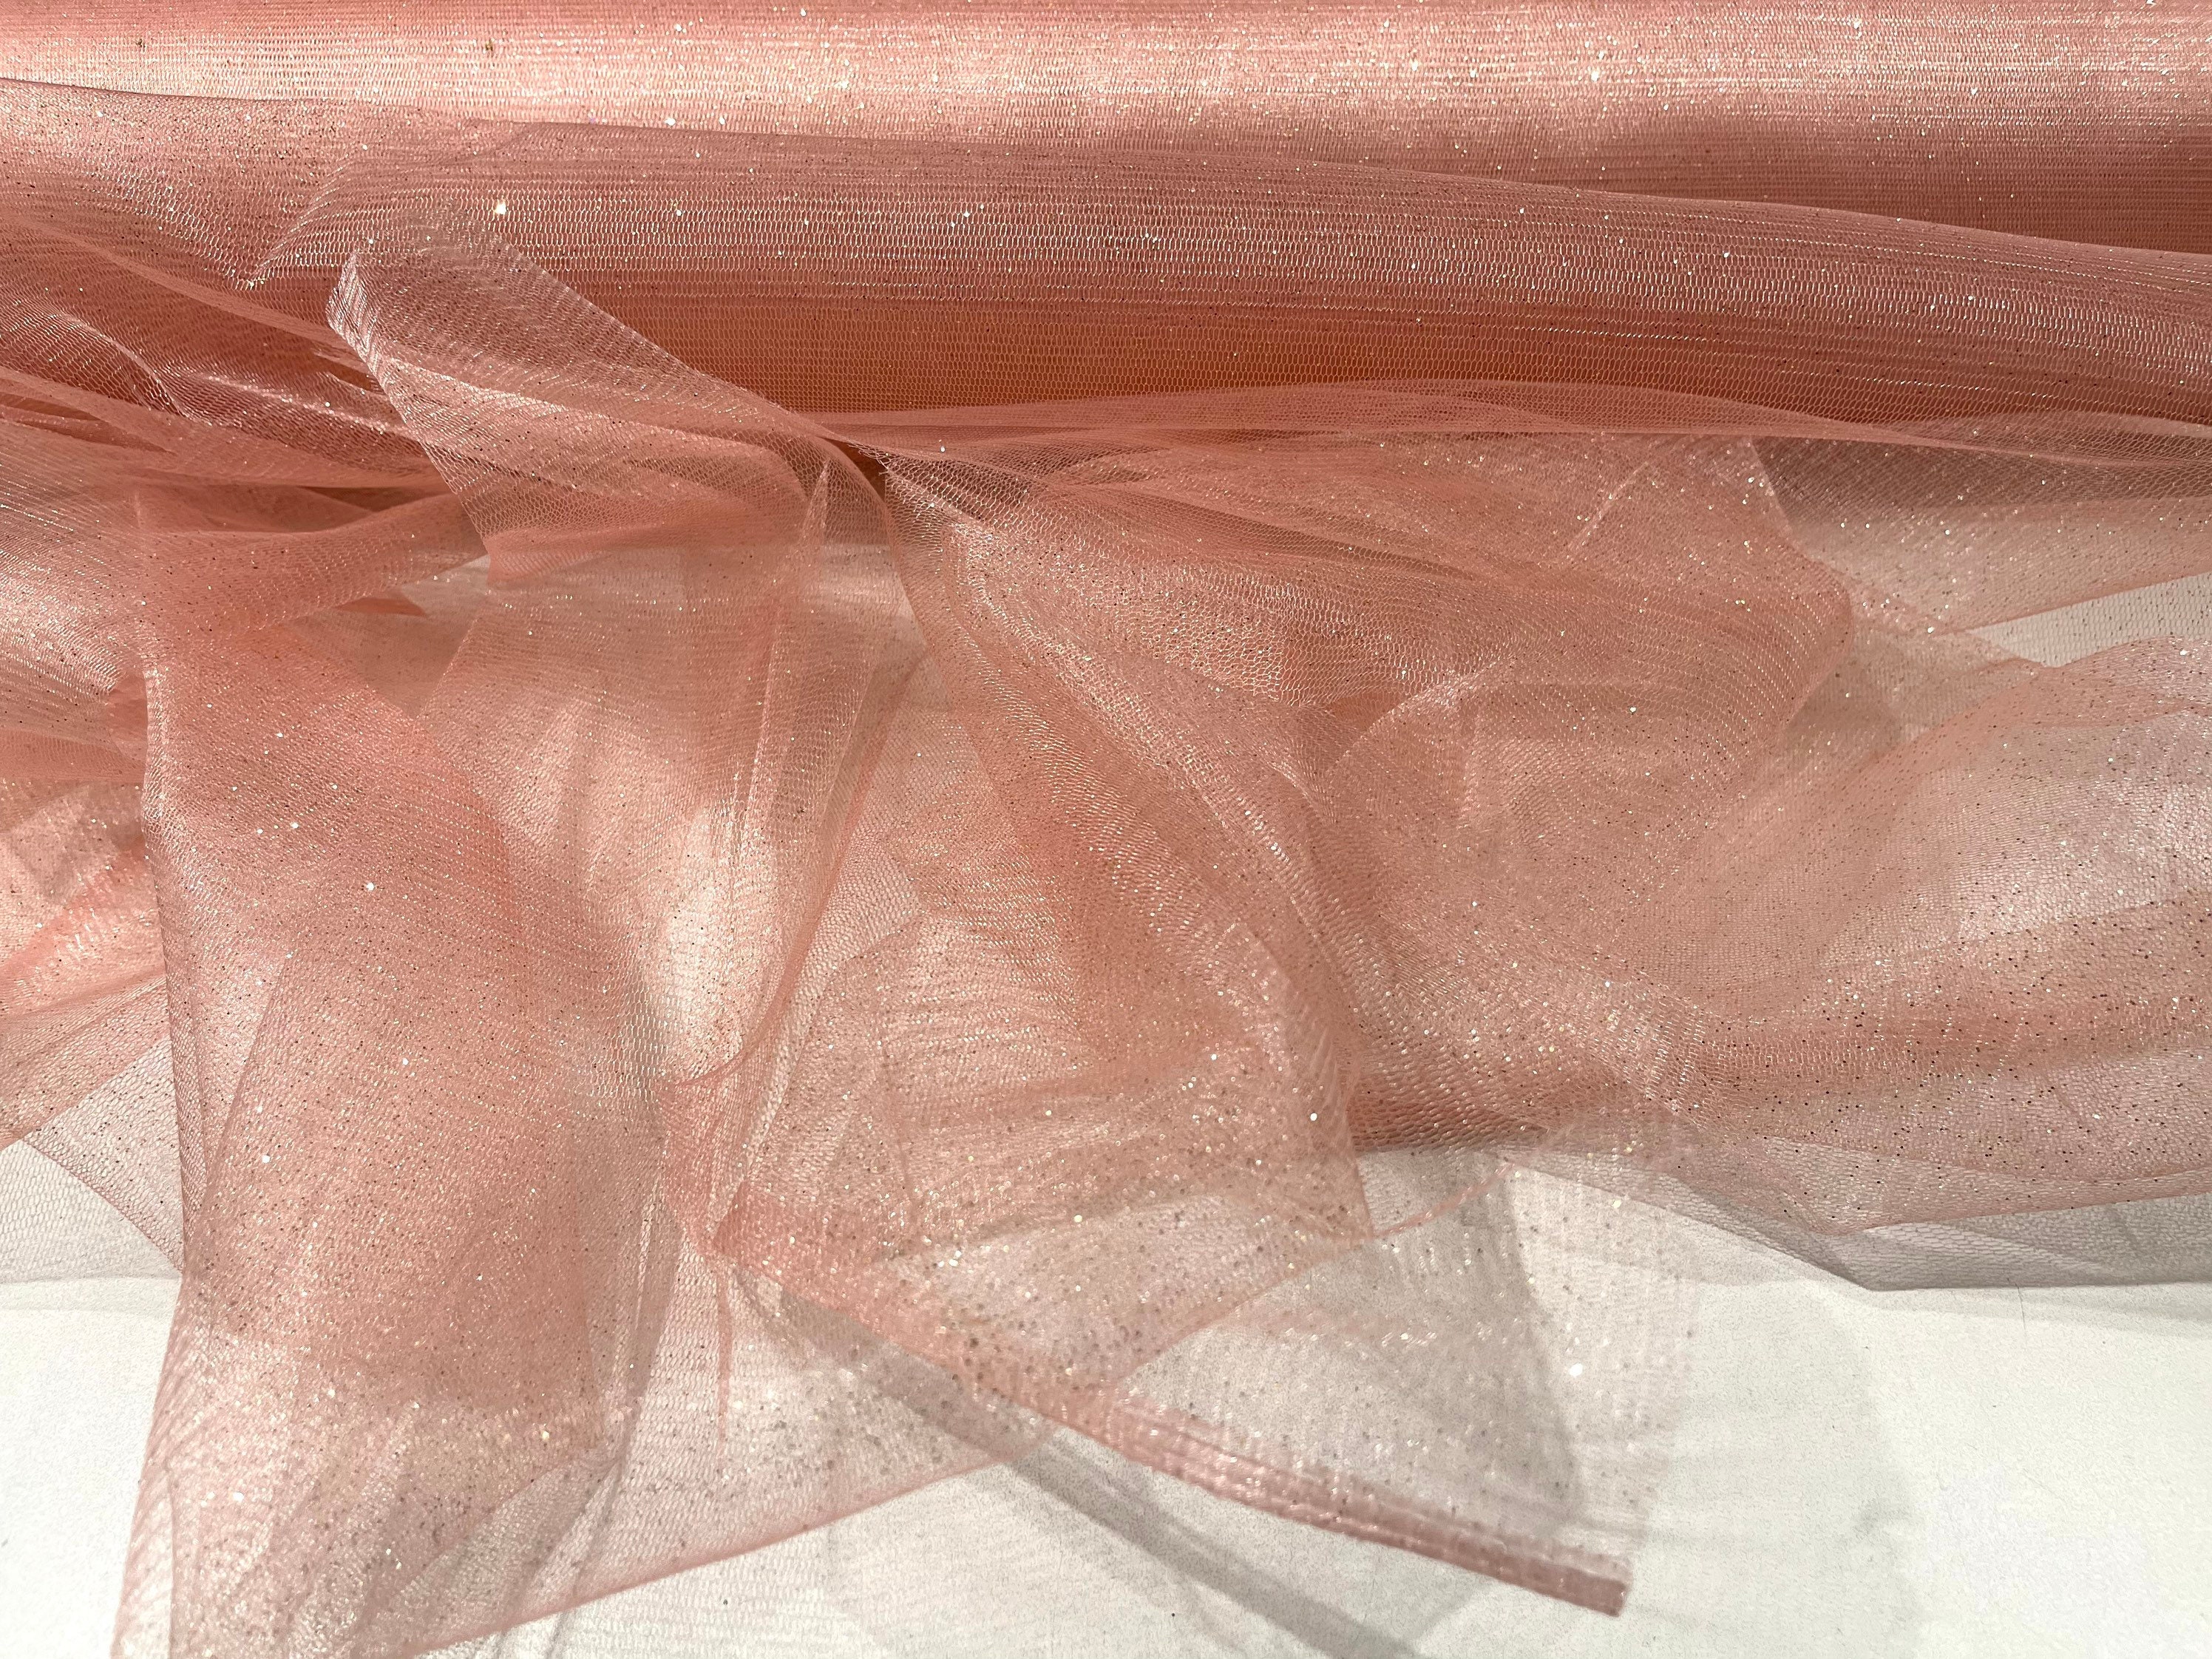 Rose Gold sparkle tulle glitter fabric shimmer/ tulle glitter for dresses/  mesh glitter fabric/ costume fabric/ wholesale